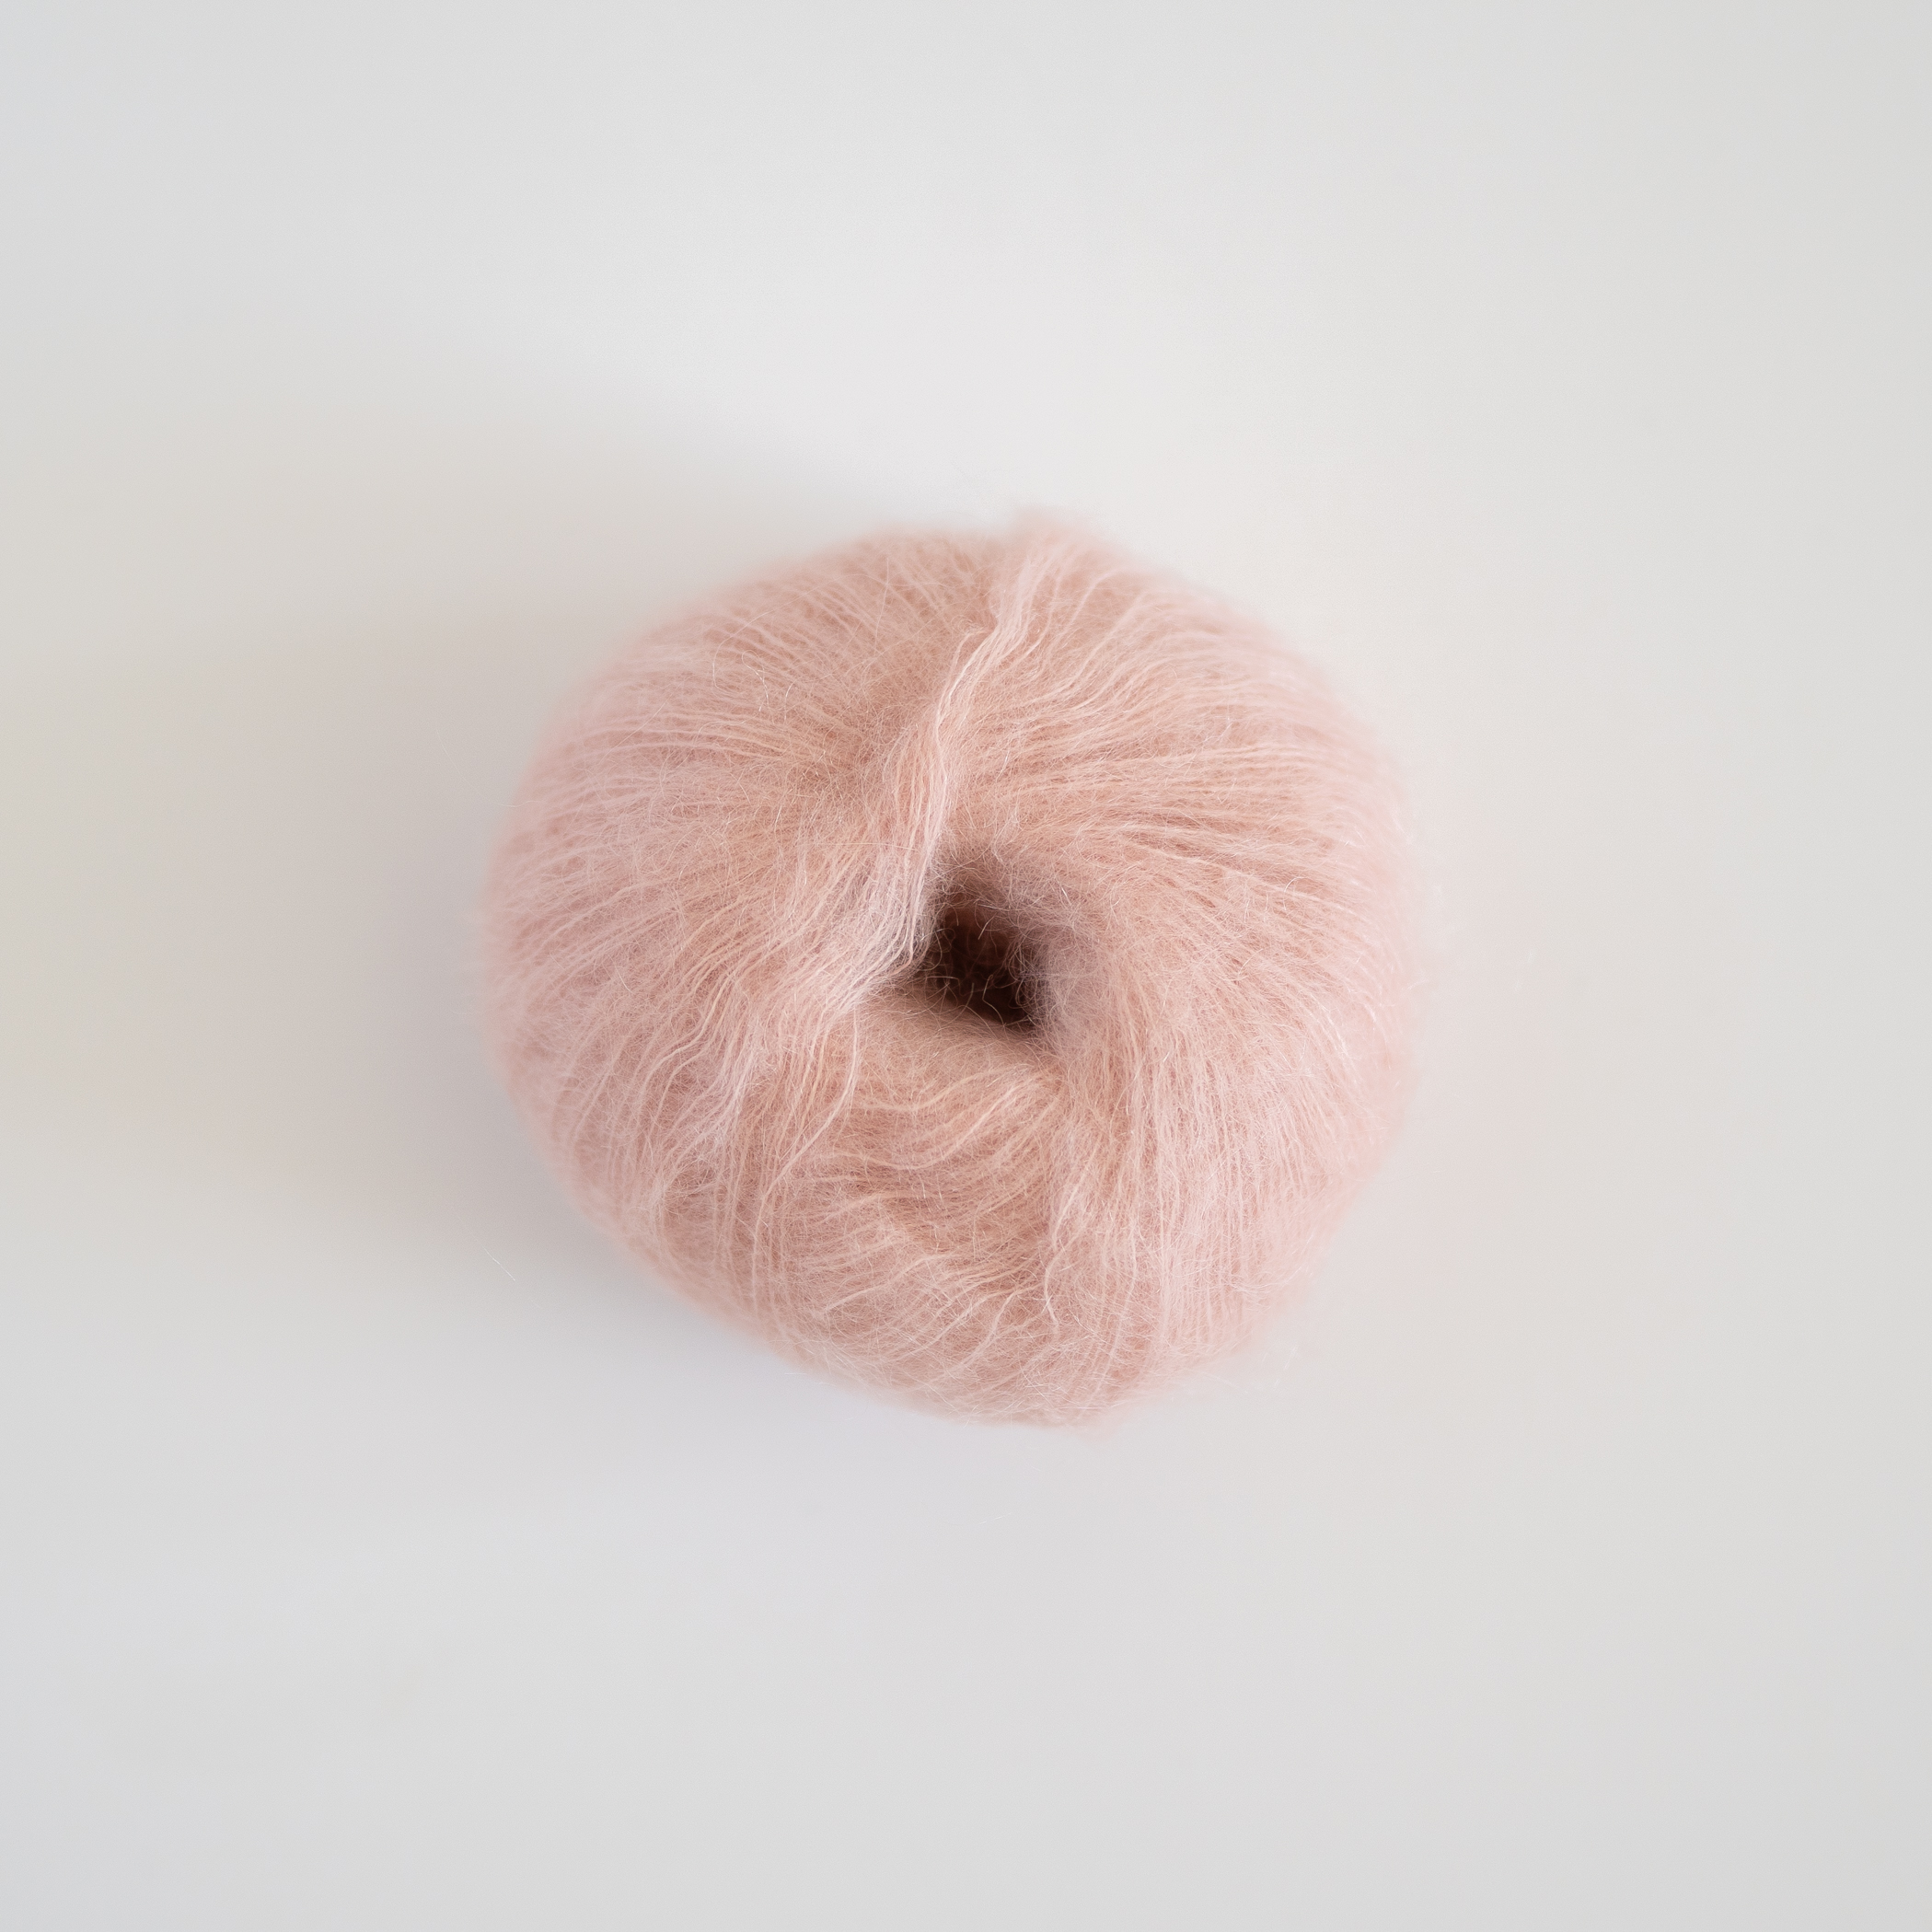  - Candyfloss mohair | Hip Mohair light pink yarn - by HipKnitShop - 02/07/2019